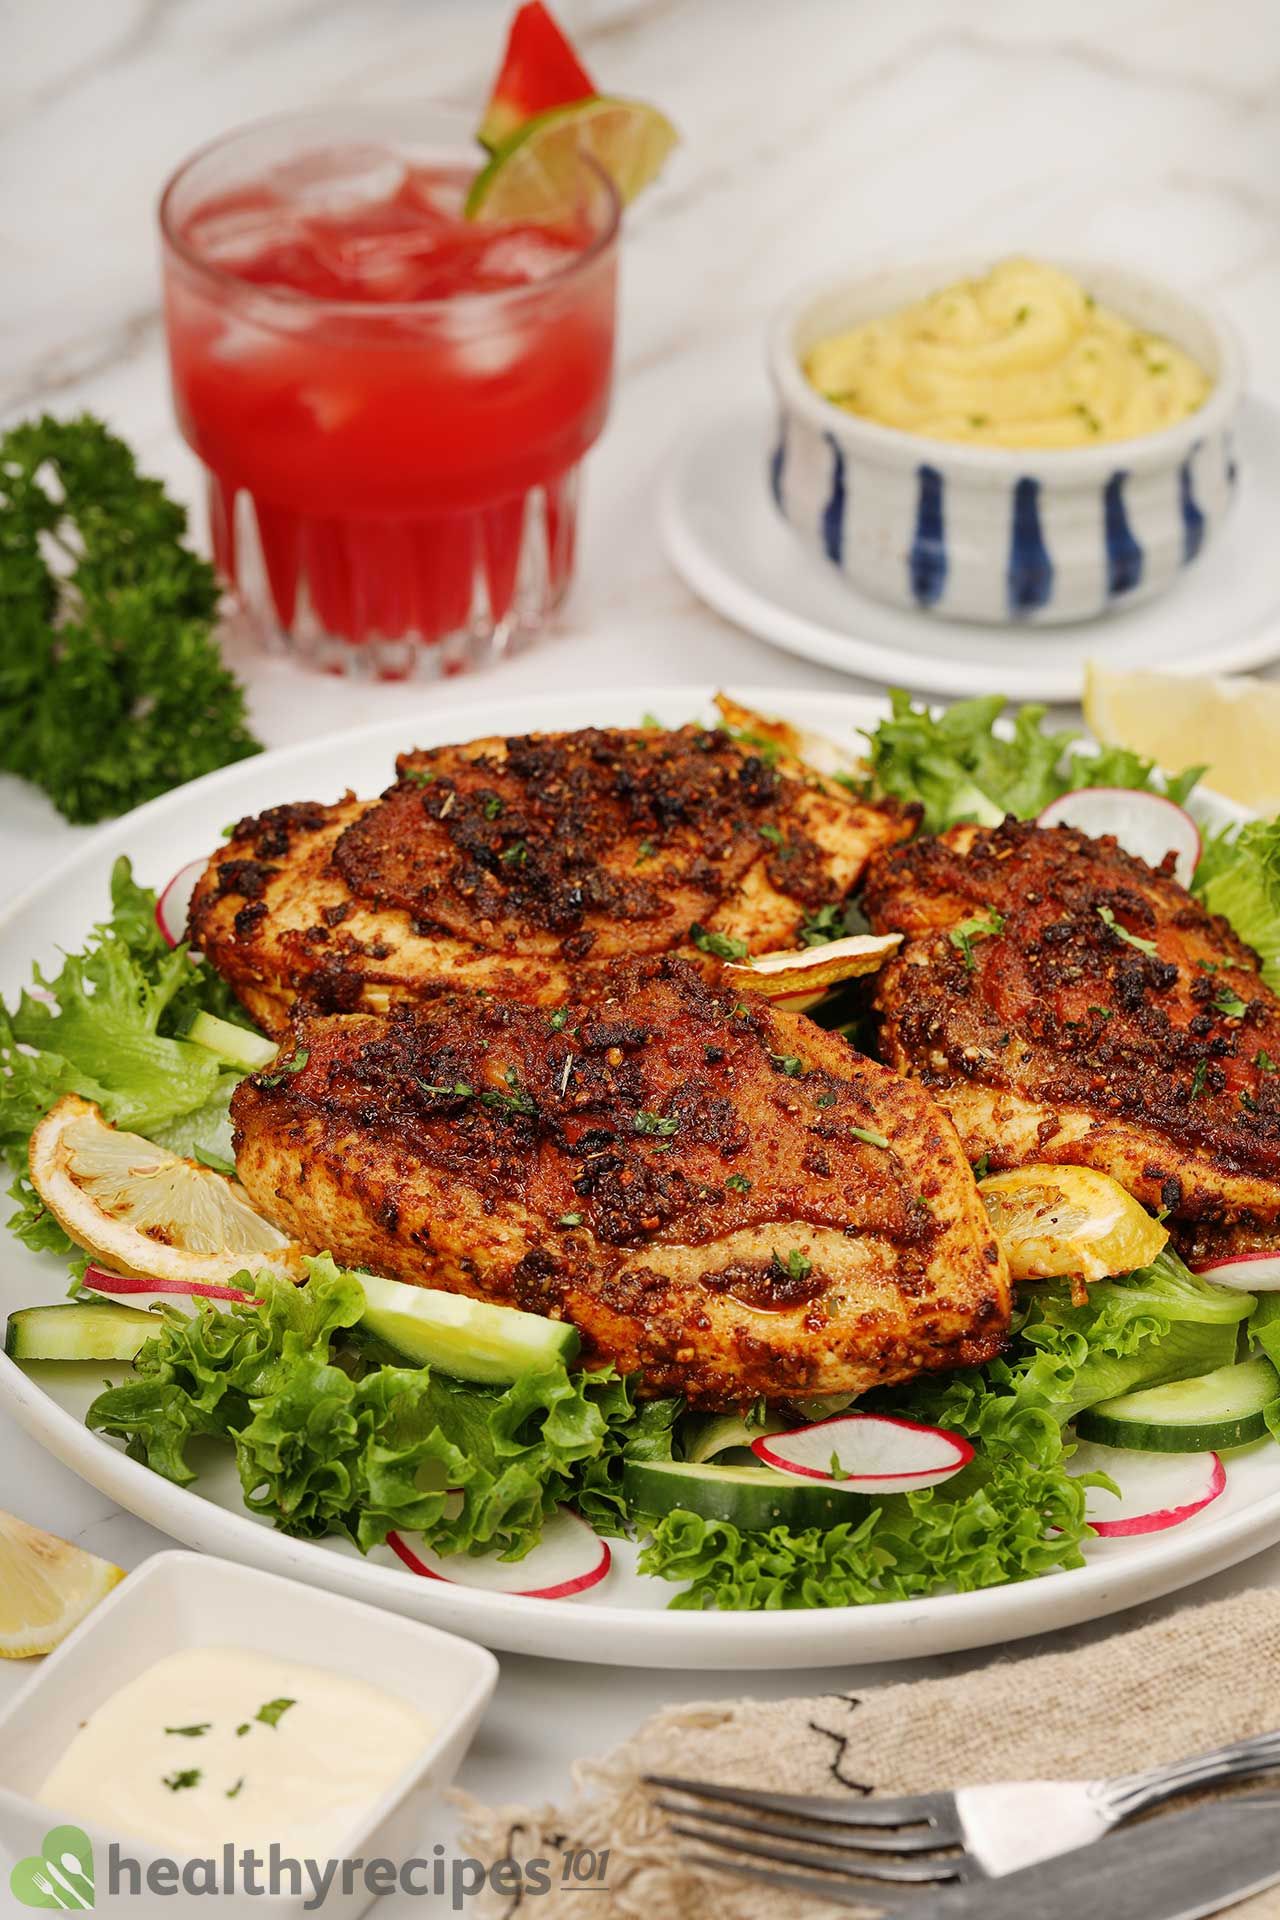 What to Serve With Blackened Chicken